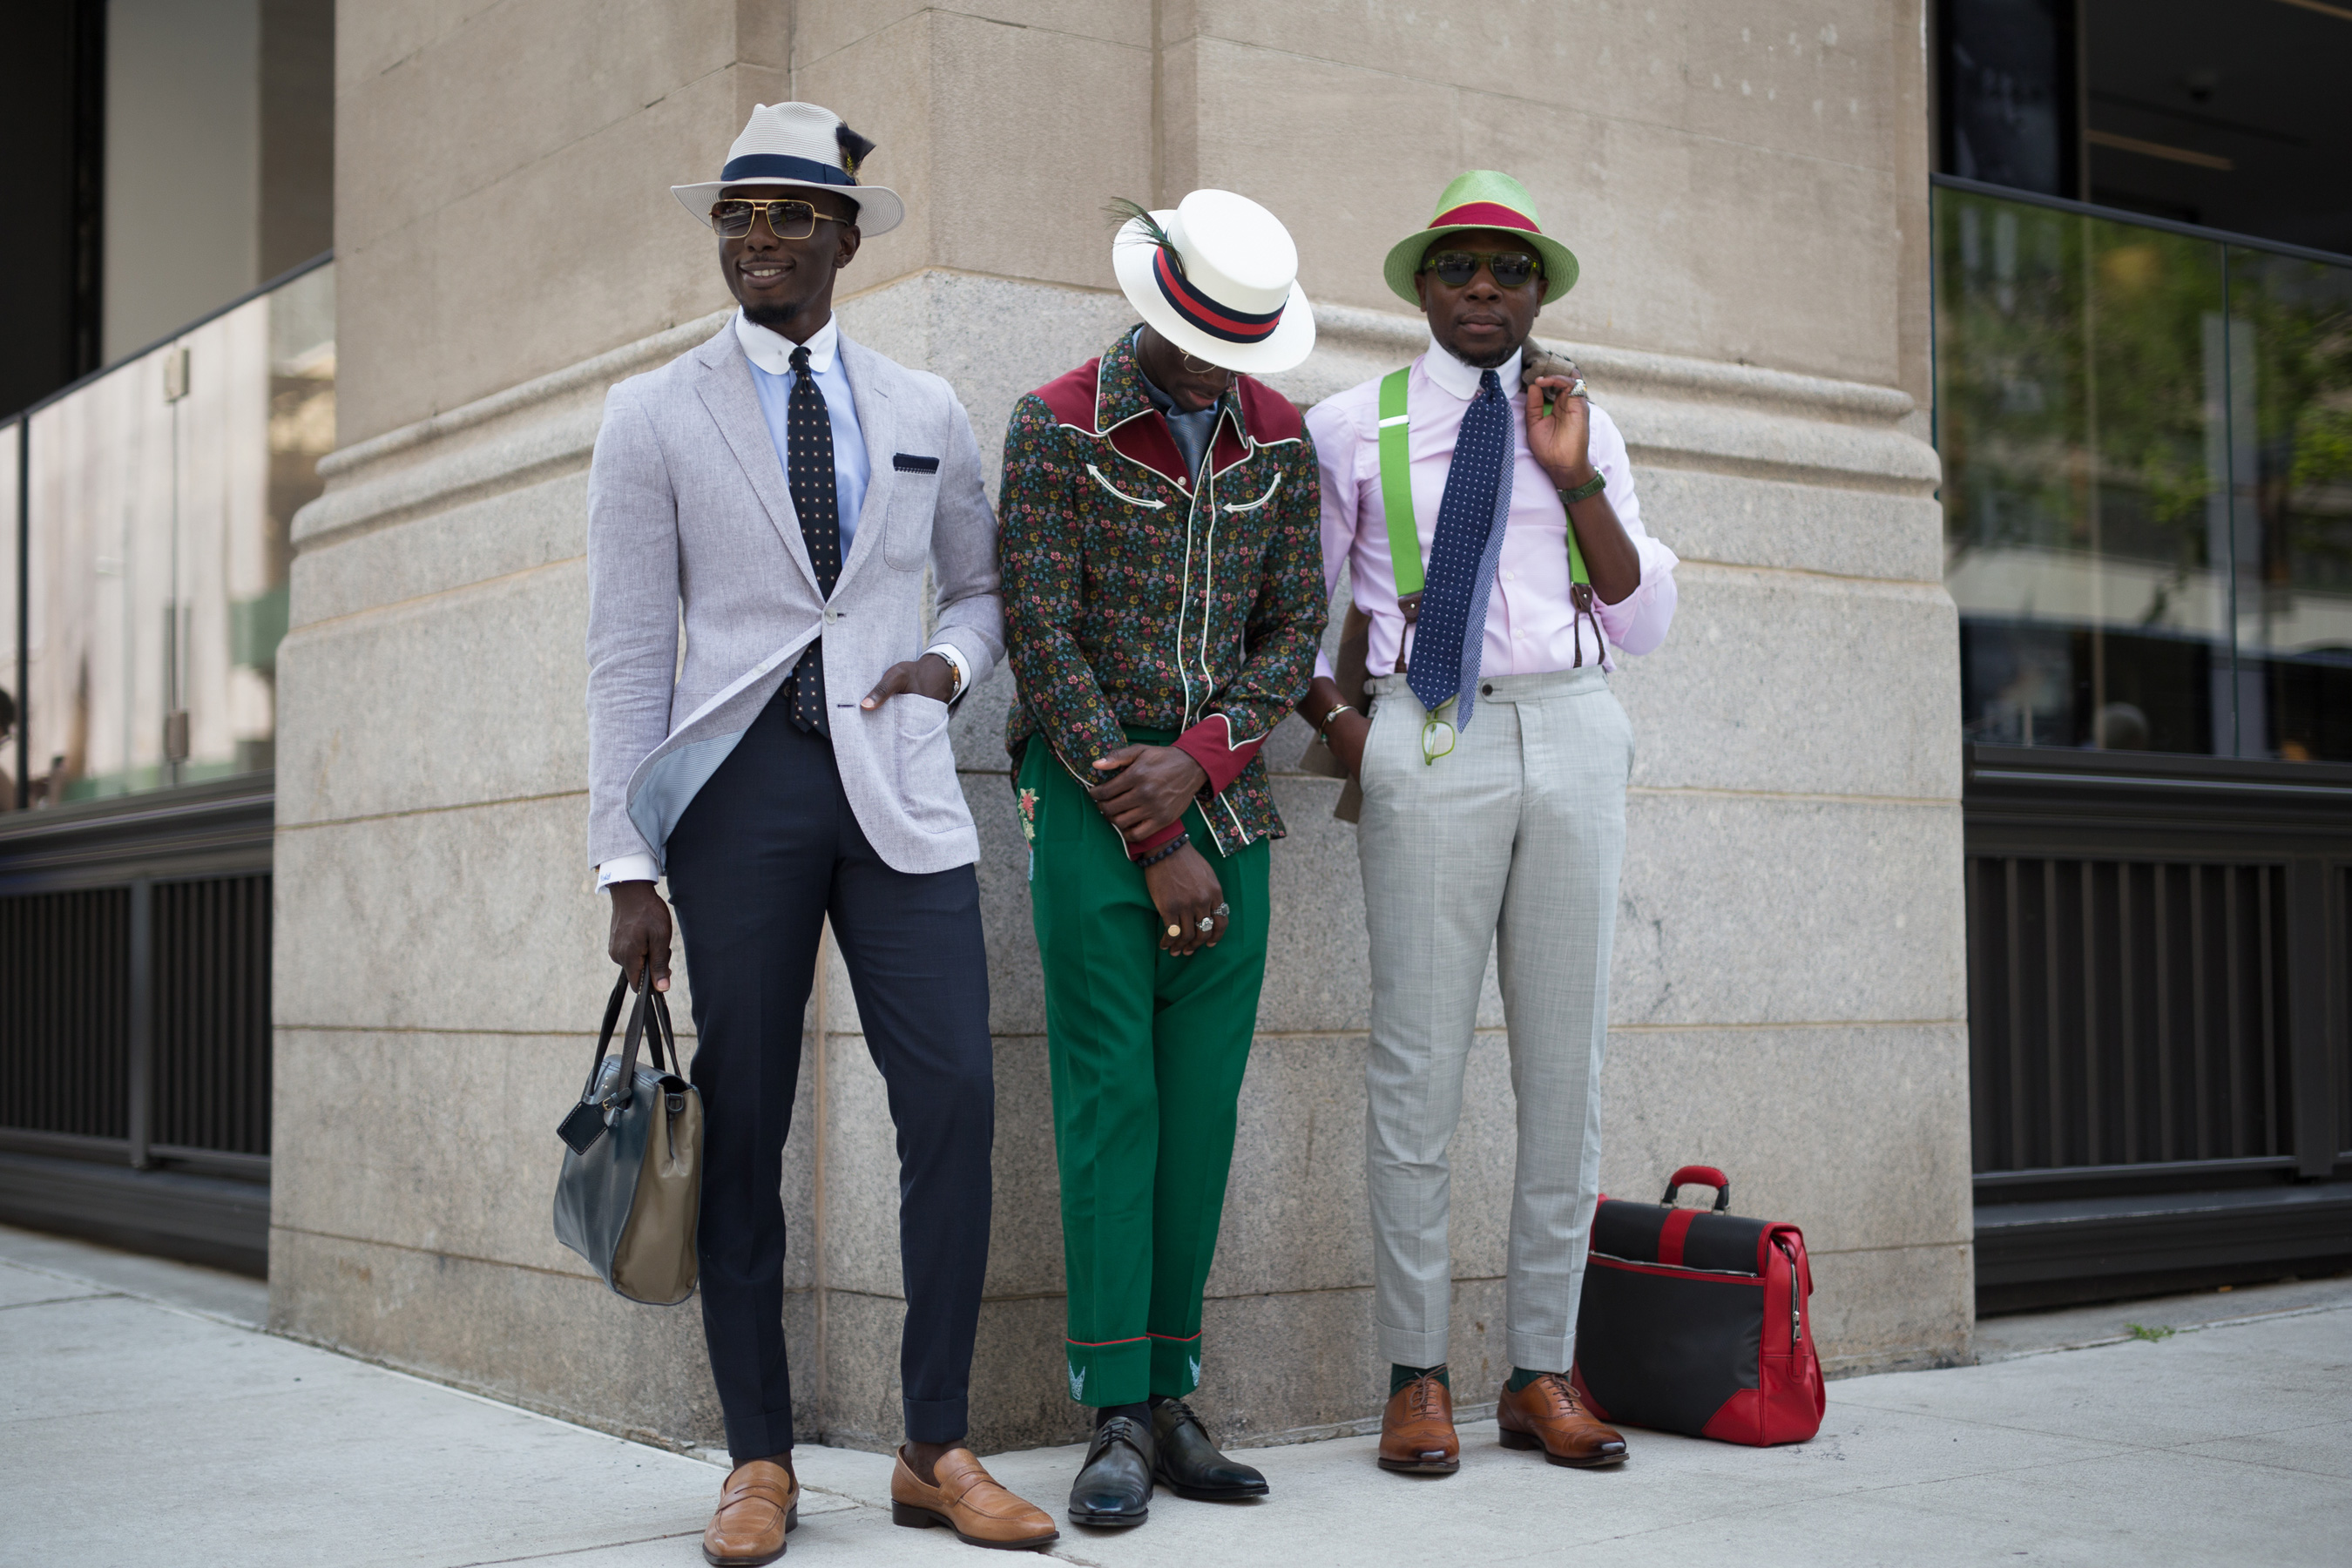 New York Fashion Week Men's Street Style Spring 2018 Day 3 - Cont.